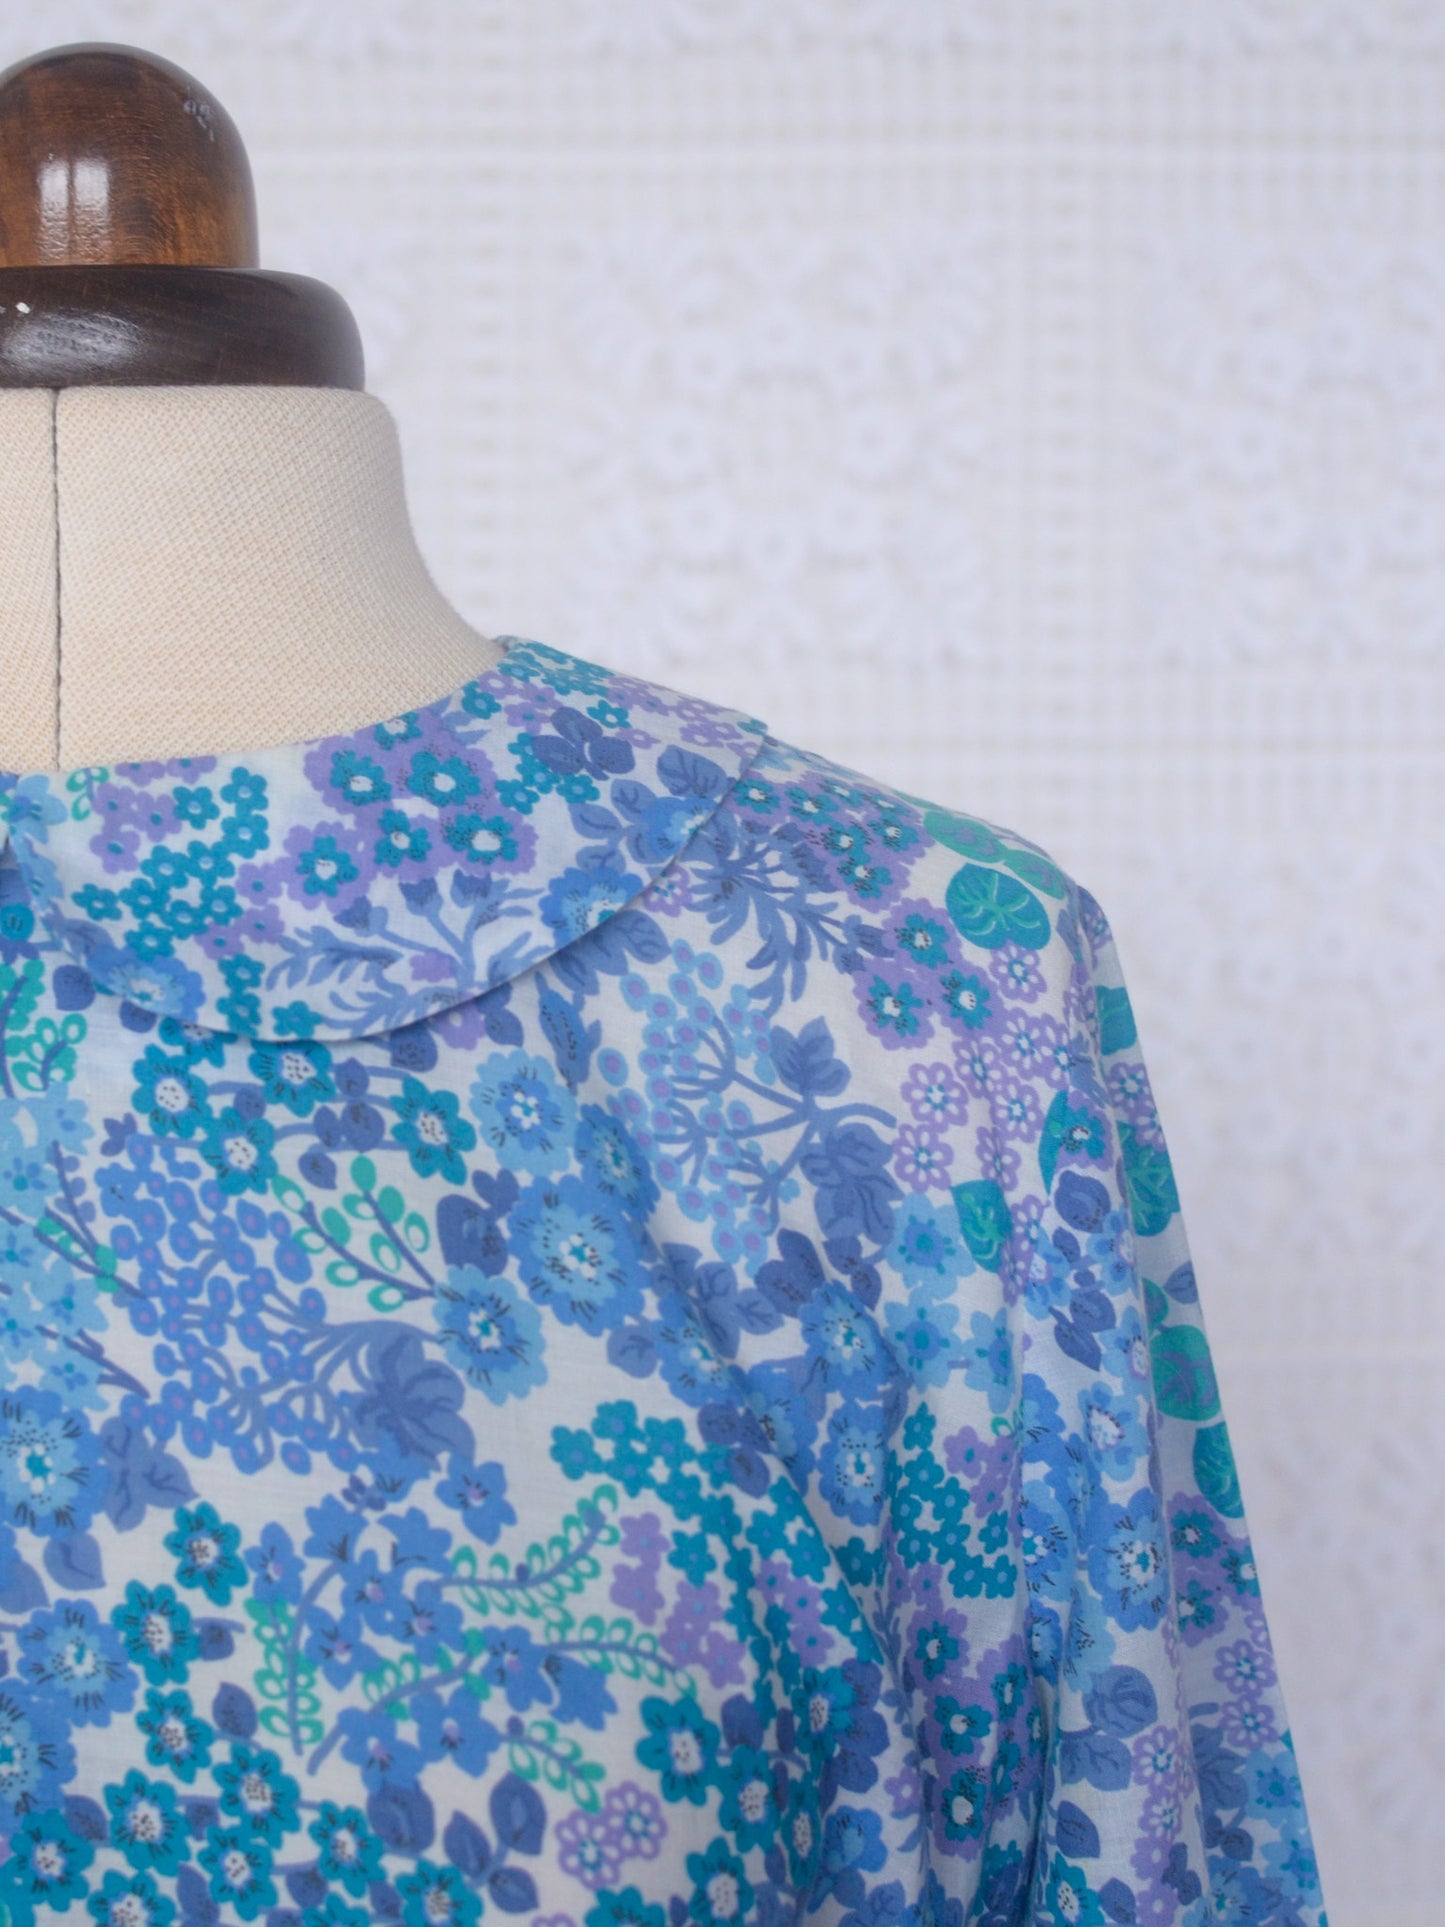 1960s style handmade lilac, blue and green scallop collar long sleeve top